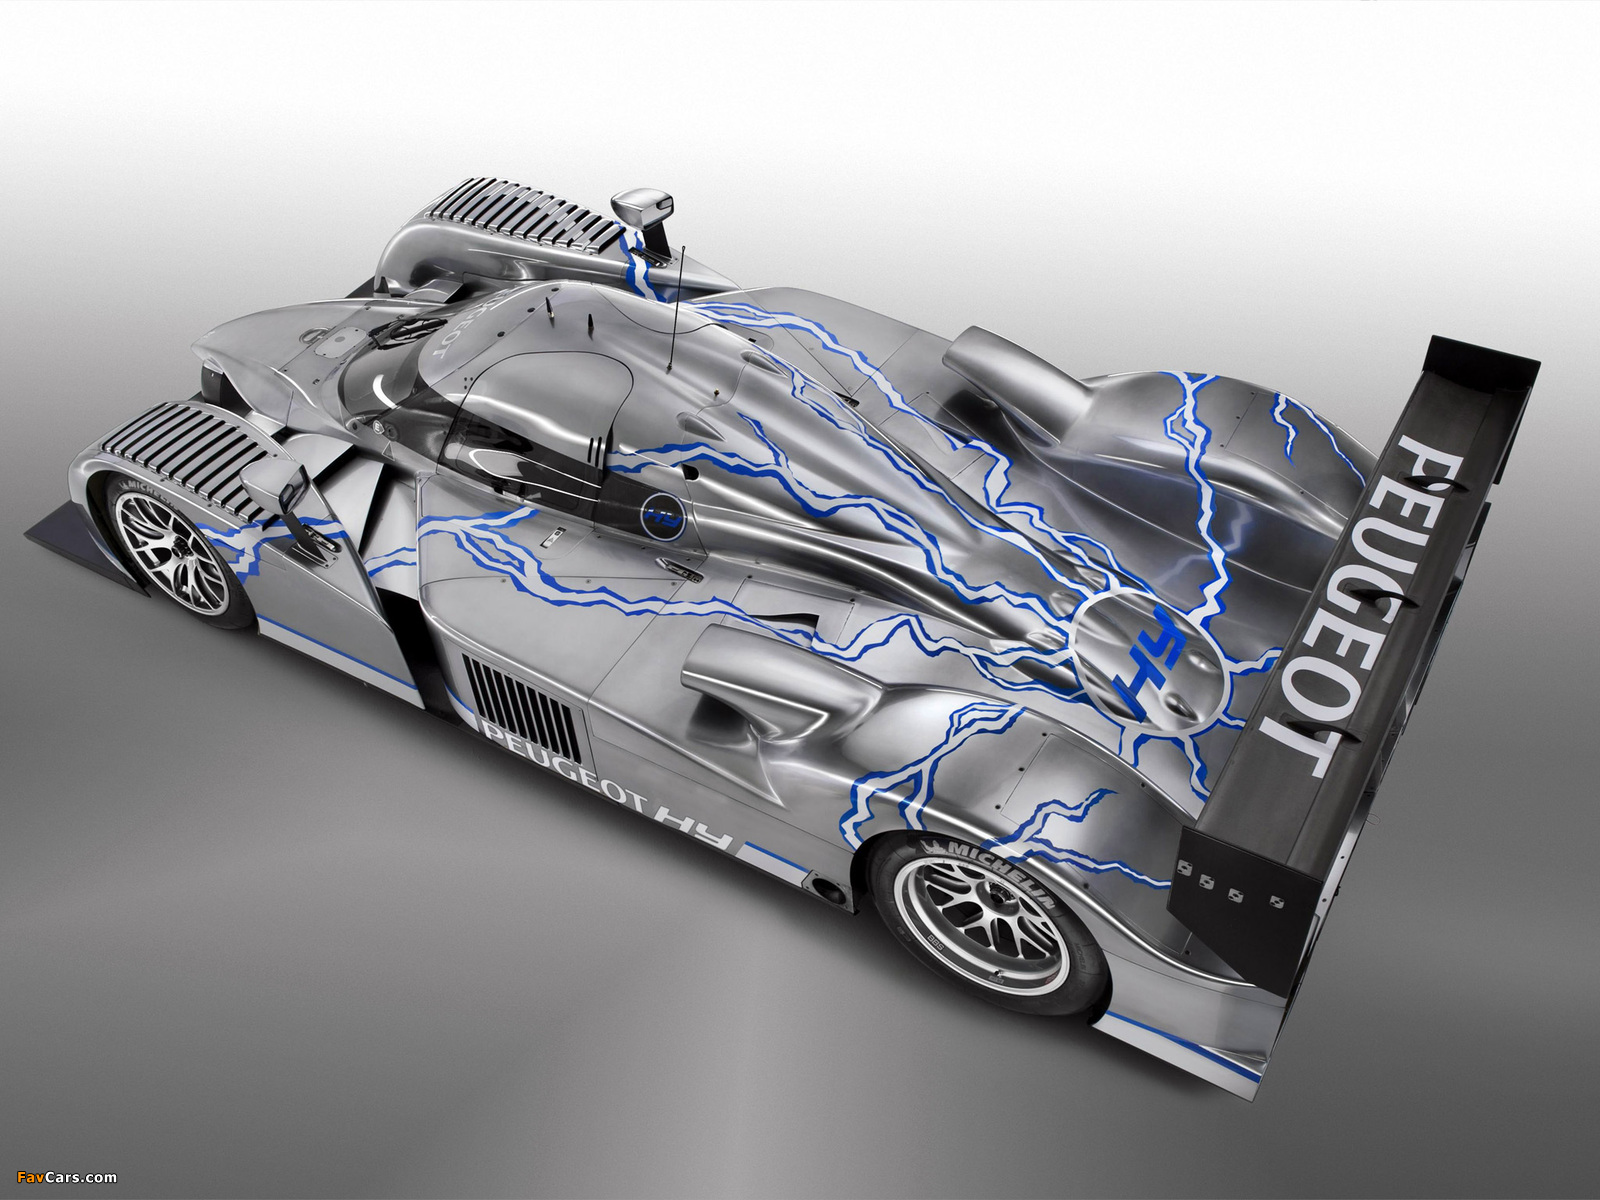 Photos of Peugeot 908 HY 2008 (1600 x 1200)